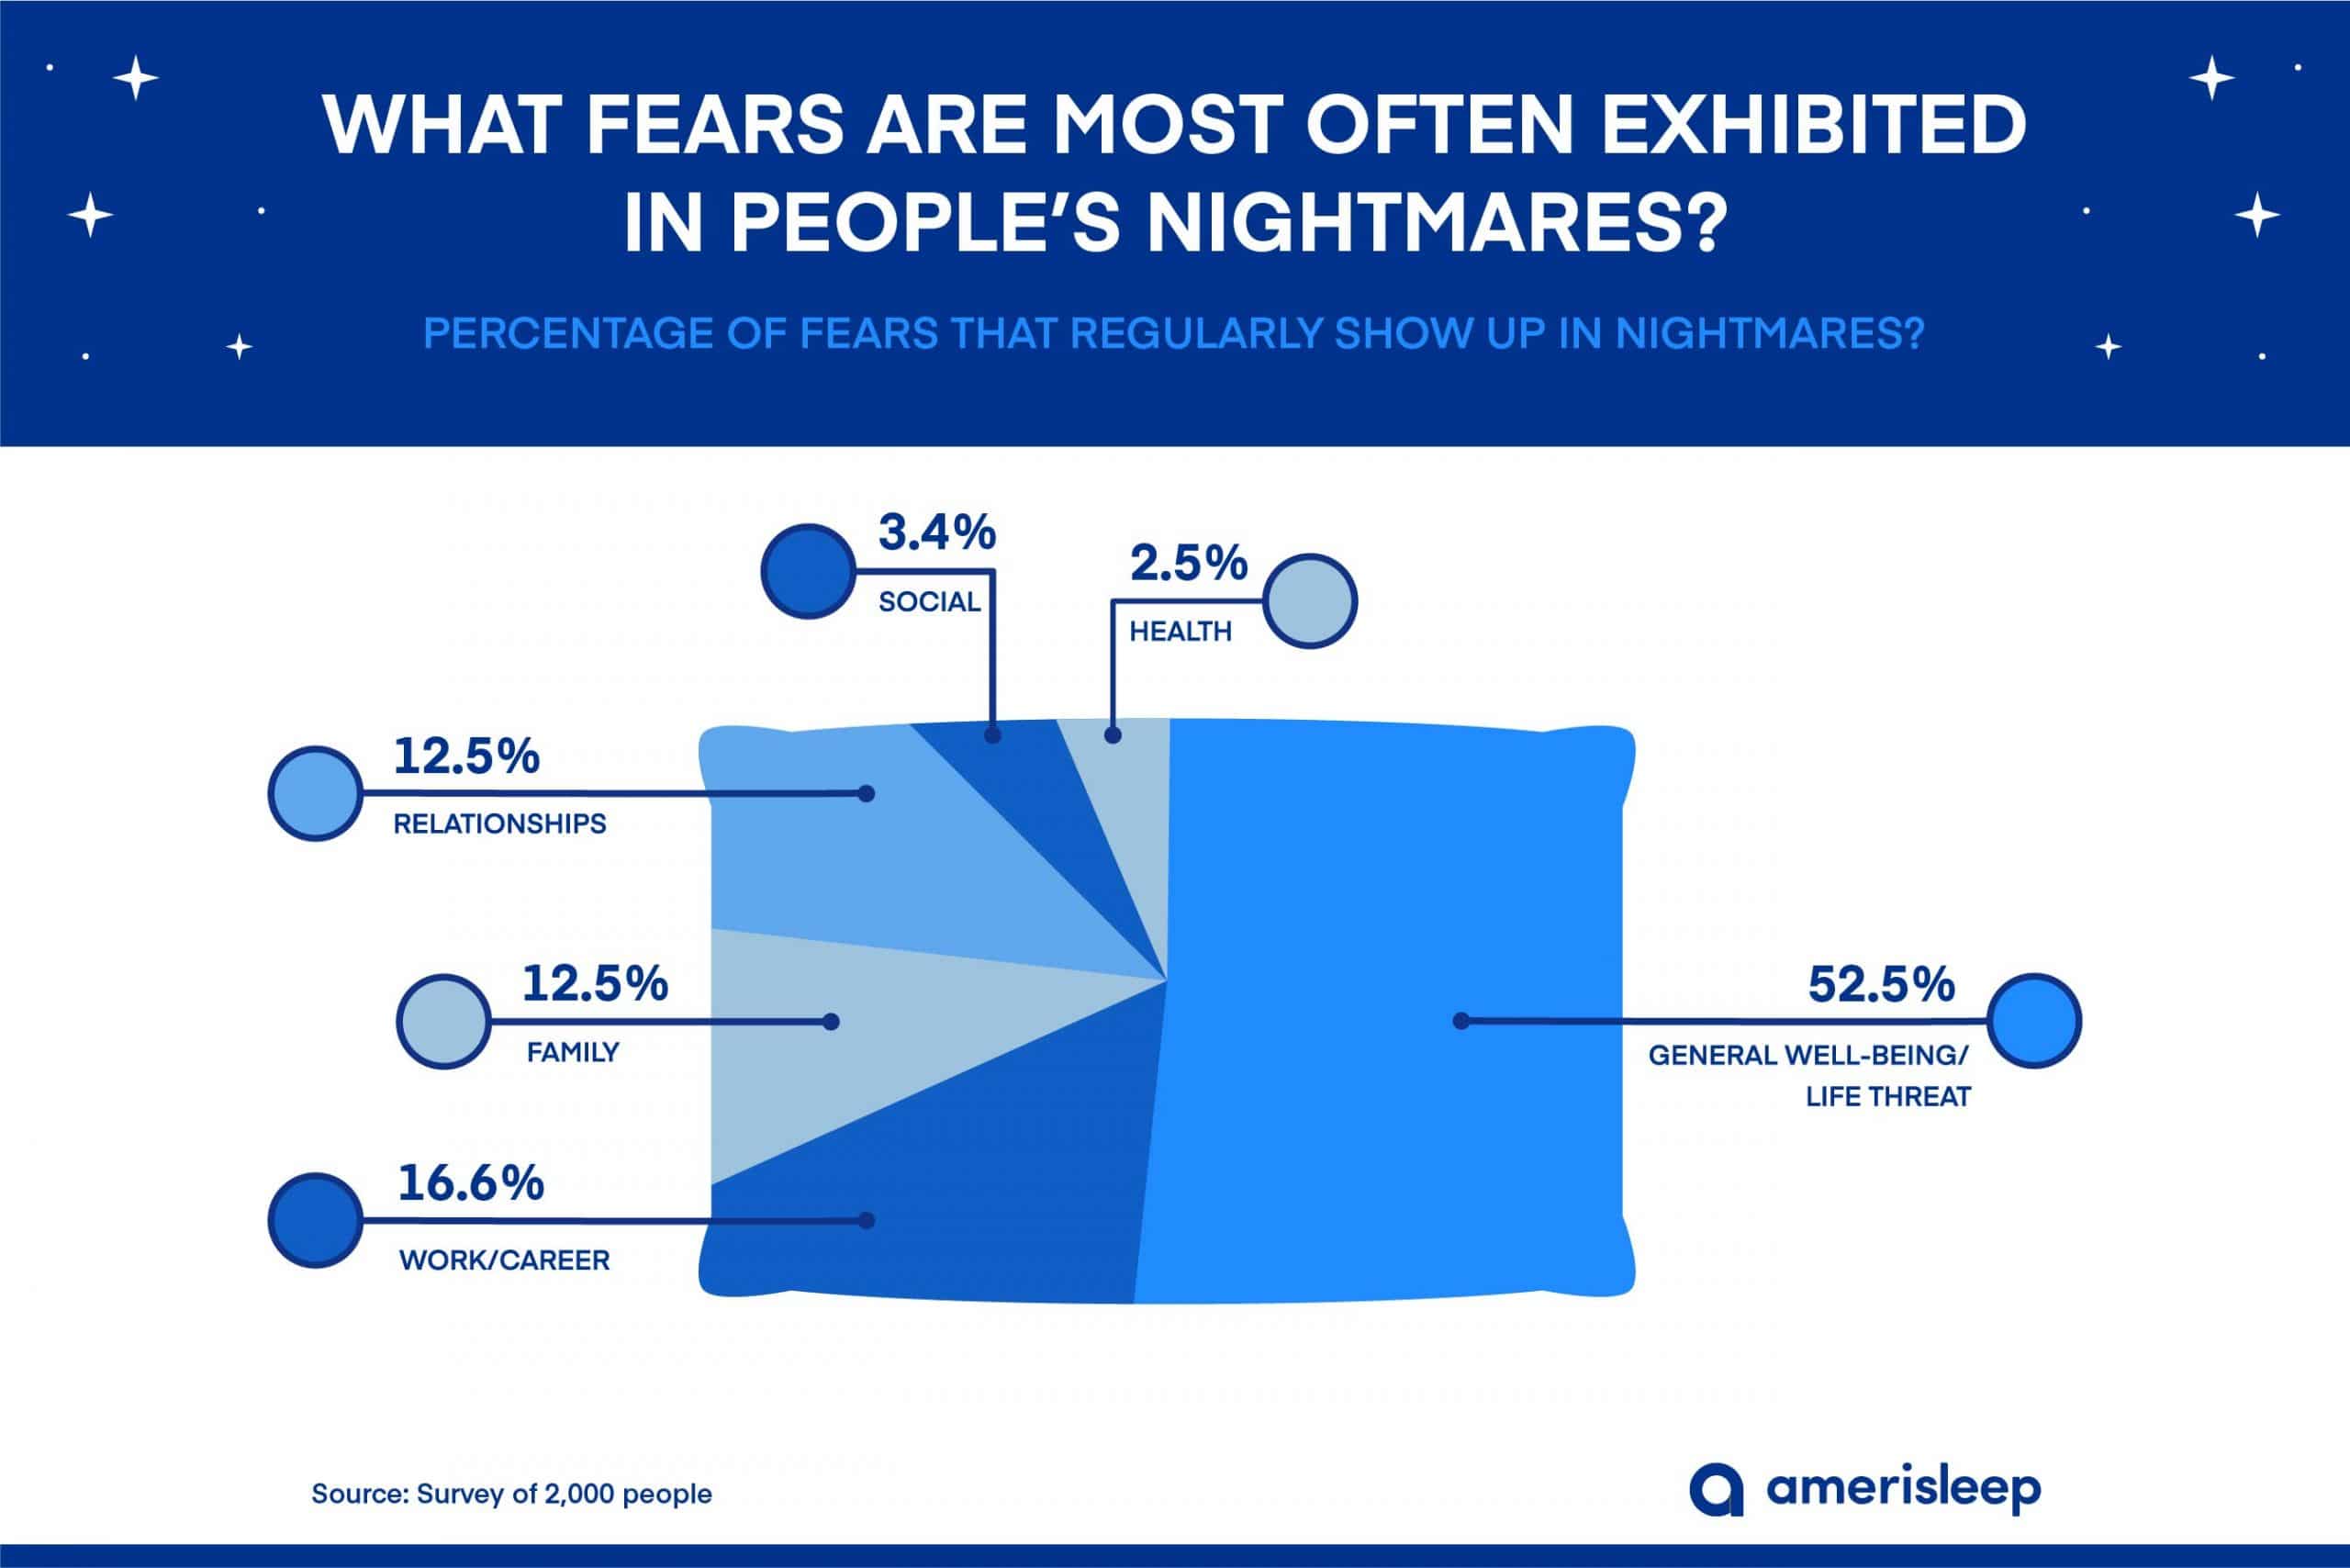 Most Common Fears in Nightmares